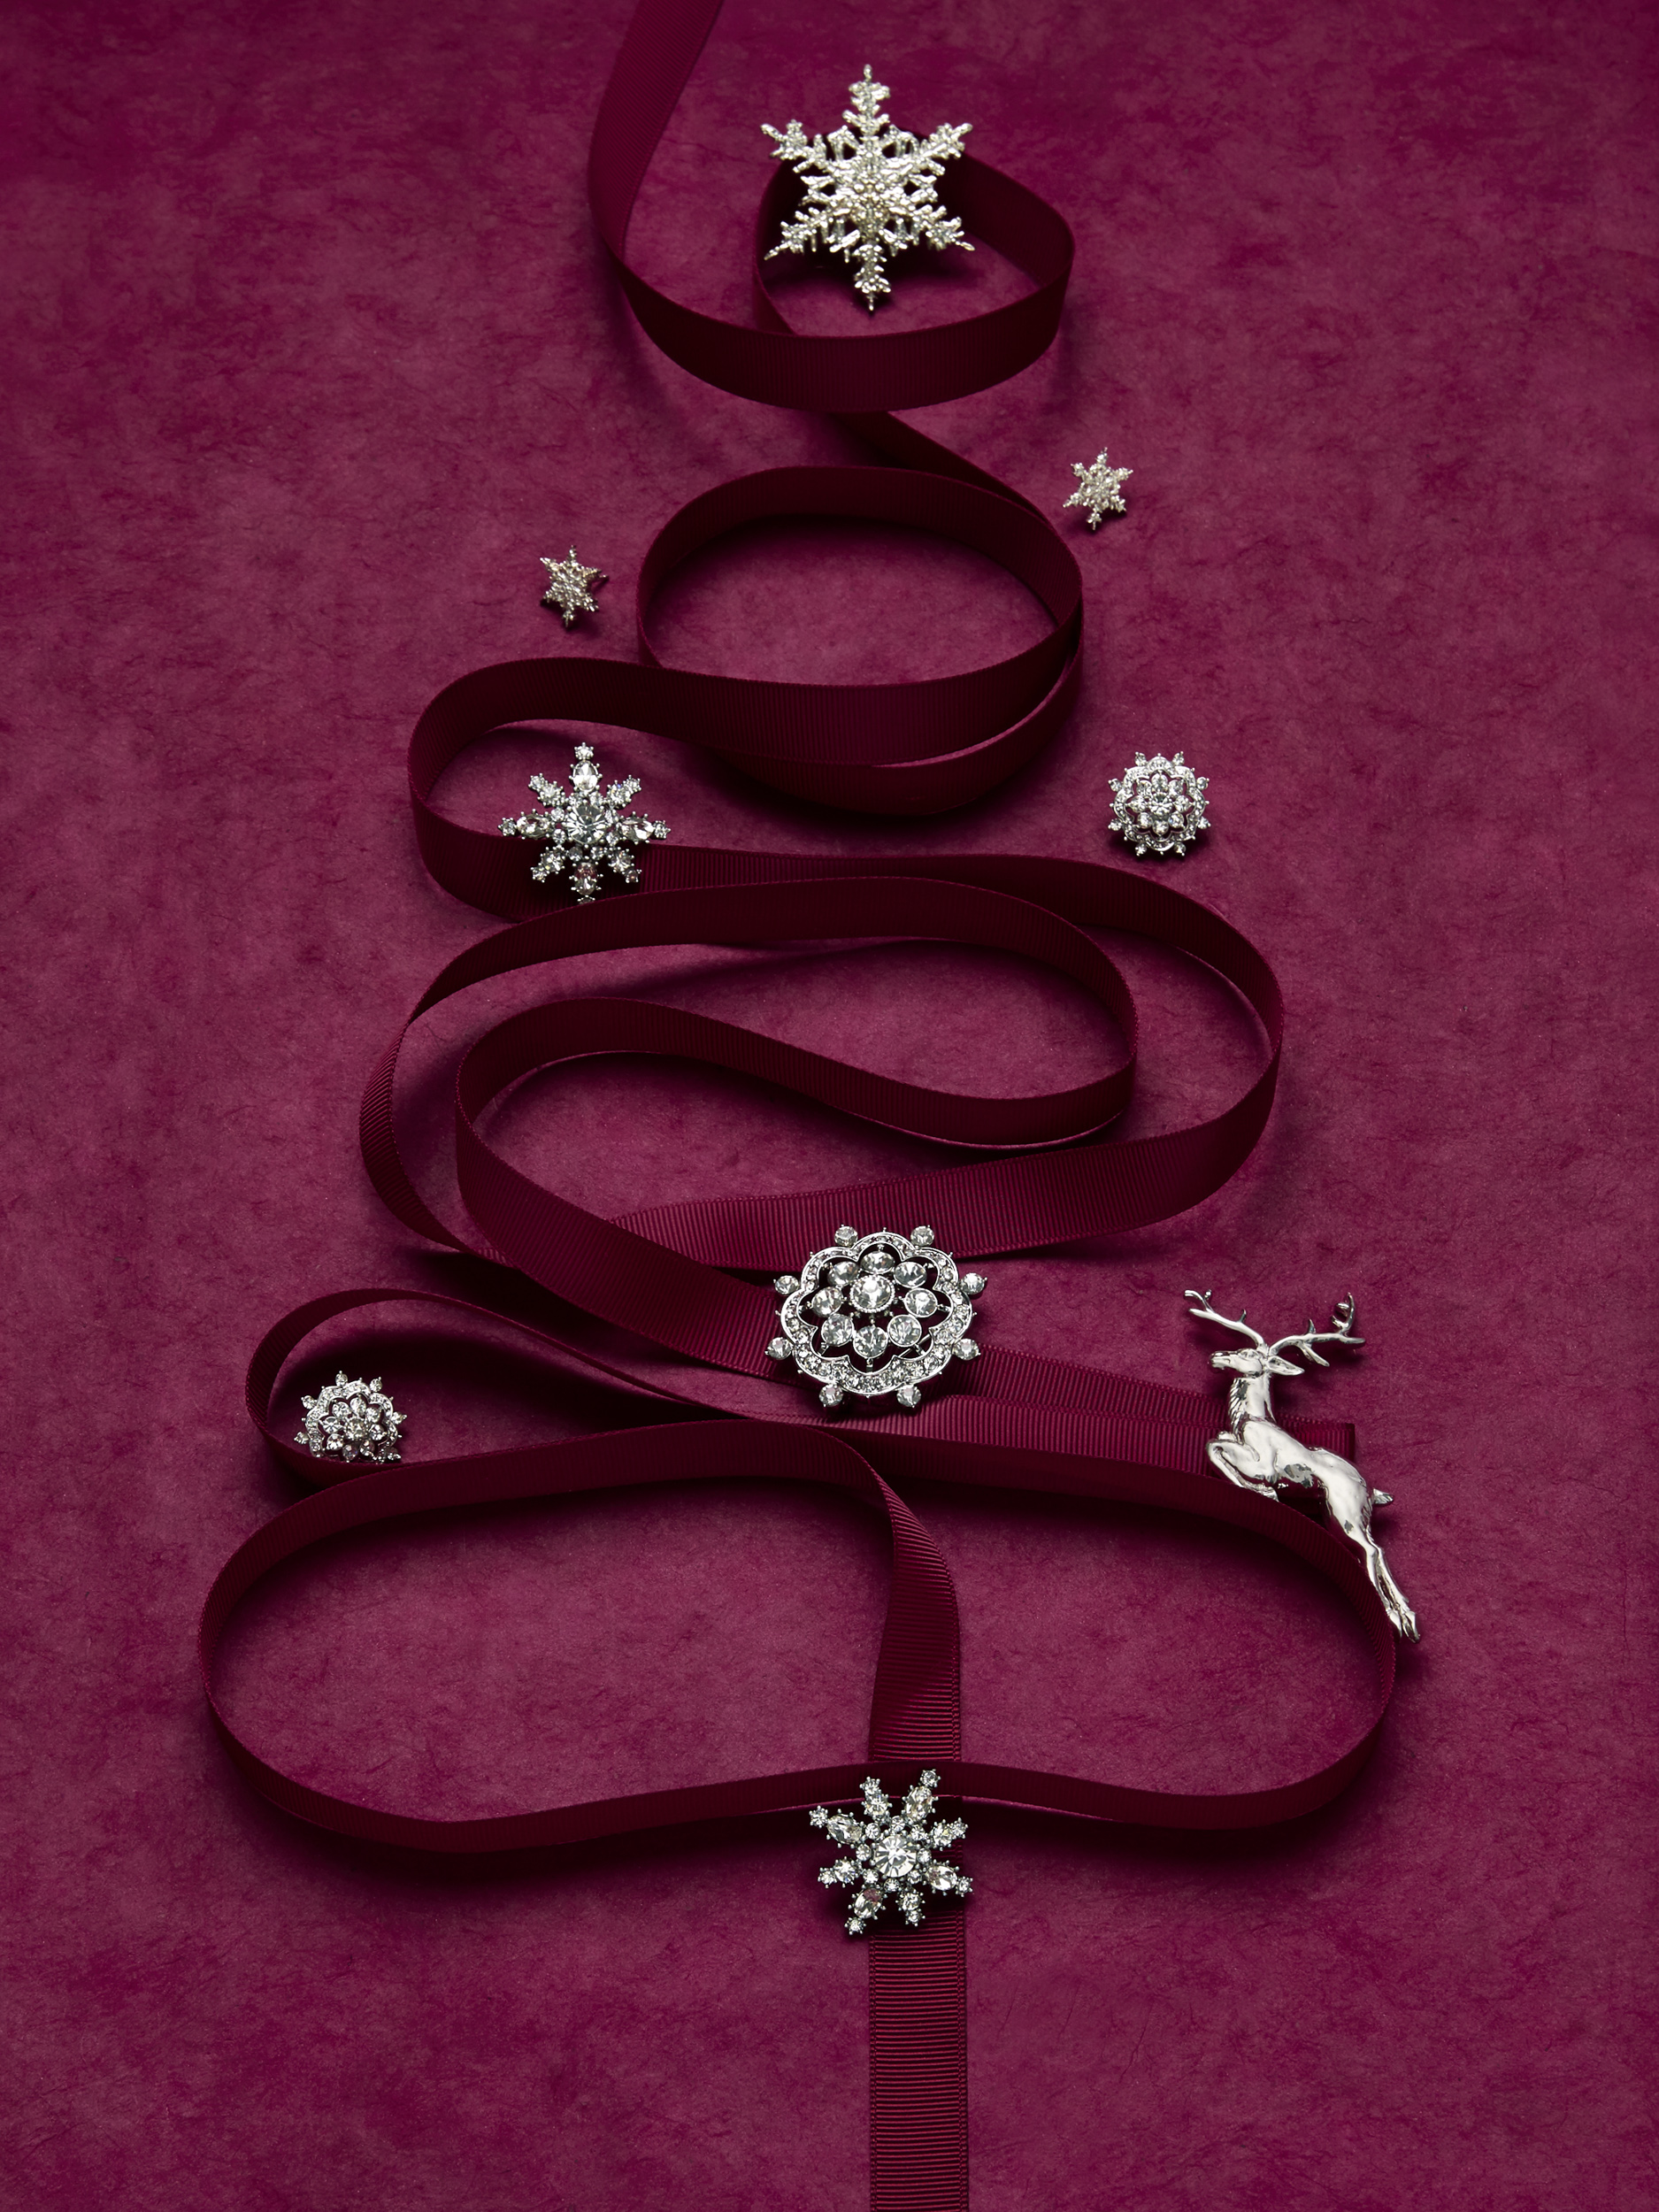 marketing still life photograph of silver and diamond jewelry including pins and earrings decorating a tree made of burgundy ribbon on a burgundy background